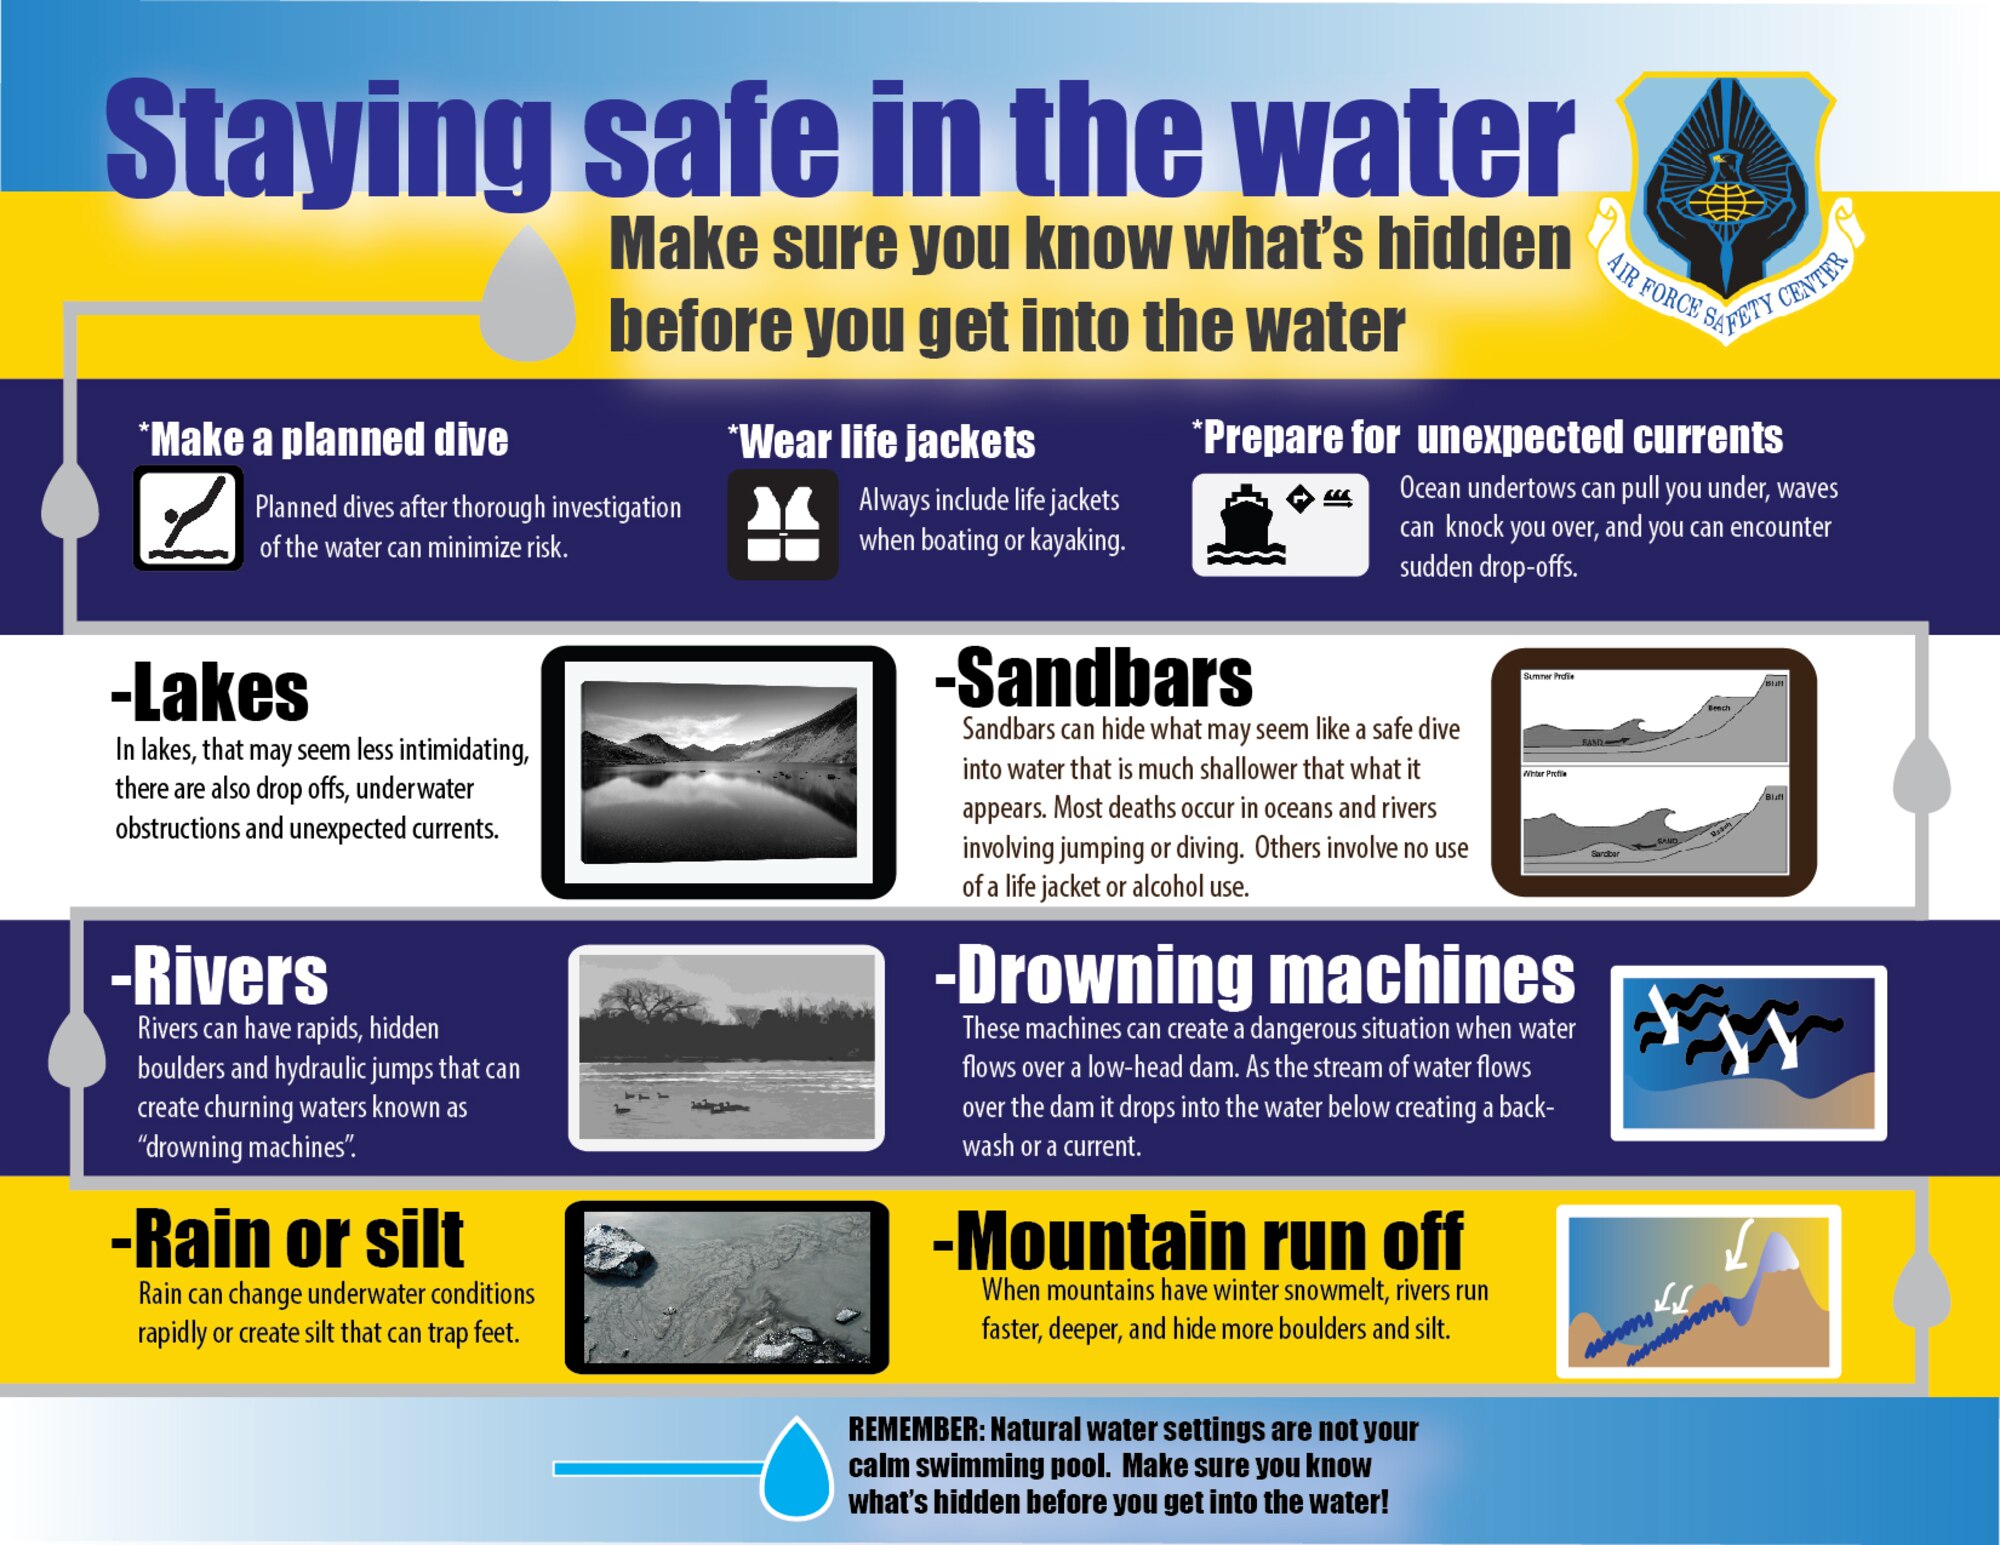 Commentary: Keeping safe during water activities amid a pandemic >Air Education and Training Command >Article Display” style=”clear:both; float:right; padding:10px 0px 10px 10px; border:0px; max-width: 335px;”> In this example, Philadelphia is the home group. Home safety is a vital problem and the flats are incessantly stuffed with state-of-the-art safety methods to make sure security for the dwellers. The bottom line: Make a wager with confidence, figuring out you will have a safety net. While disposable brands can be utilized, most simply would not have the energy to secure the look and magnificence you want. If doing so, you each first want to select a cake type, size, and magnificence. Do your research first. They’ll pursue roles together with healthcare information analyst, healthcare business enterprise intelligence analyst, healthcare analysis analyst, or healthcare informatics supervisor. Do your research. Check with AM Best, a company that displays the financial duty of insurance companies. Even when you’re a small company or a lone individual there’s an advert swap chance available for you. Programs which may be higher suited for your child’s ability degree and people that may supply the possibility to participate in contests and other events could be value your time and effort to search out.</p>
<p> For the first time in pay-TV’s historical past, it bought worse and that’s vital. Early bookers are able to avail better charges and better automotive availability, not like those who’re in urgency and have no time to pick cautiously. For the best possible expertise, you might should go for probably the most prominent and the most important esports bookies in enterprise. Houston Apartment Finder is free service providing business that employs highly experienced employees with thorough understanding of the realm and its apartments. Many of the apartments in the realm are designed with a pool, and a few of them even offer pool lifeguards in case of any difficulty. There are quite a few home finders working in every space of the town, which provide one with all the data on the available apartments, such because the features, rent, and many others. Houston apartments for rent broadly talking present settlers with the required and most modern amenities and amenities. Yet there may be so way more occurring.</p>
<p> Learn extra concerning the forms of baseball bets that go well with you, and have fun. While these methods have been extremely profitable, the only plays we fully endorse are our greatest Bets. The character of instructors which might be described on the websites should assist one make the correct choice. The argument here is that the best way to realize AI alignment is by matching a language model with the appropriate “persona”, to use my phrases, or basins, to make use of janus’s. I agree with Tyler Cowen’s argument about Existential Risk, AI, and the Inevitable Turn in Human History: AI is coming, and we merely don’t know what the outcomes can be, so our responsibility is to push for the positive outcome by which AI makes life markedly better. As nice as dimeline books may be, there are even better options on the market for moneyline bettors. Dark, elaborate colonial Caribbean style is a rich, romantic take on 18th-century elegance; handsome Arts and Crafts fashion also provides an important decorating basis. Houston Apartment Finder is compensated from the Houston apartments, which explains why it supplies free service to its customers and arranges apartments in the best guide.</p>
<p> Not every gym could also be able to supply the identical quality of service or entry to the fitting opportunities. Sundar Pichai and Satya Nadella might fear about the same destiny, <a href=